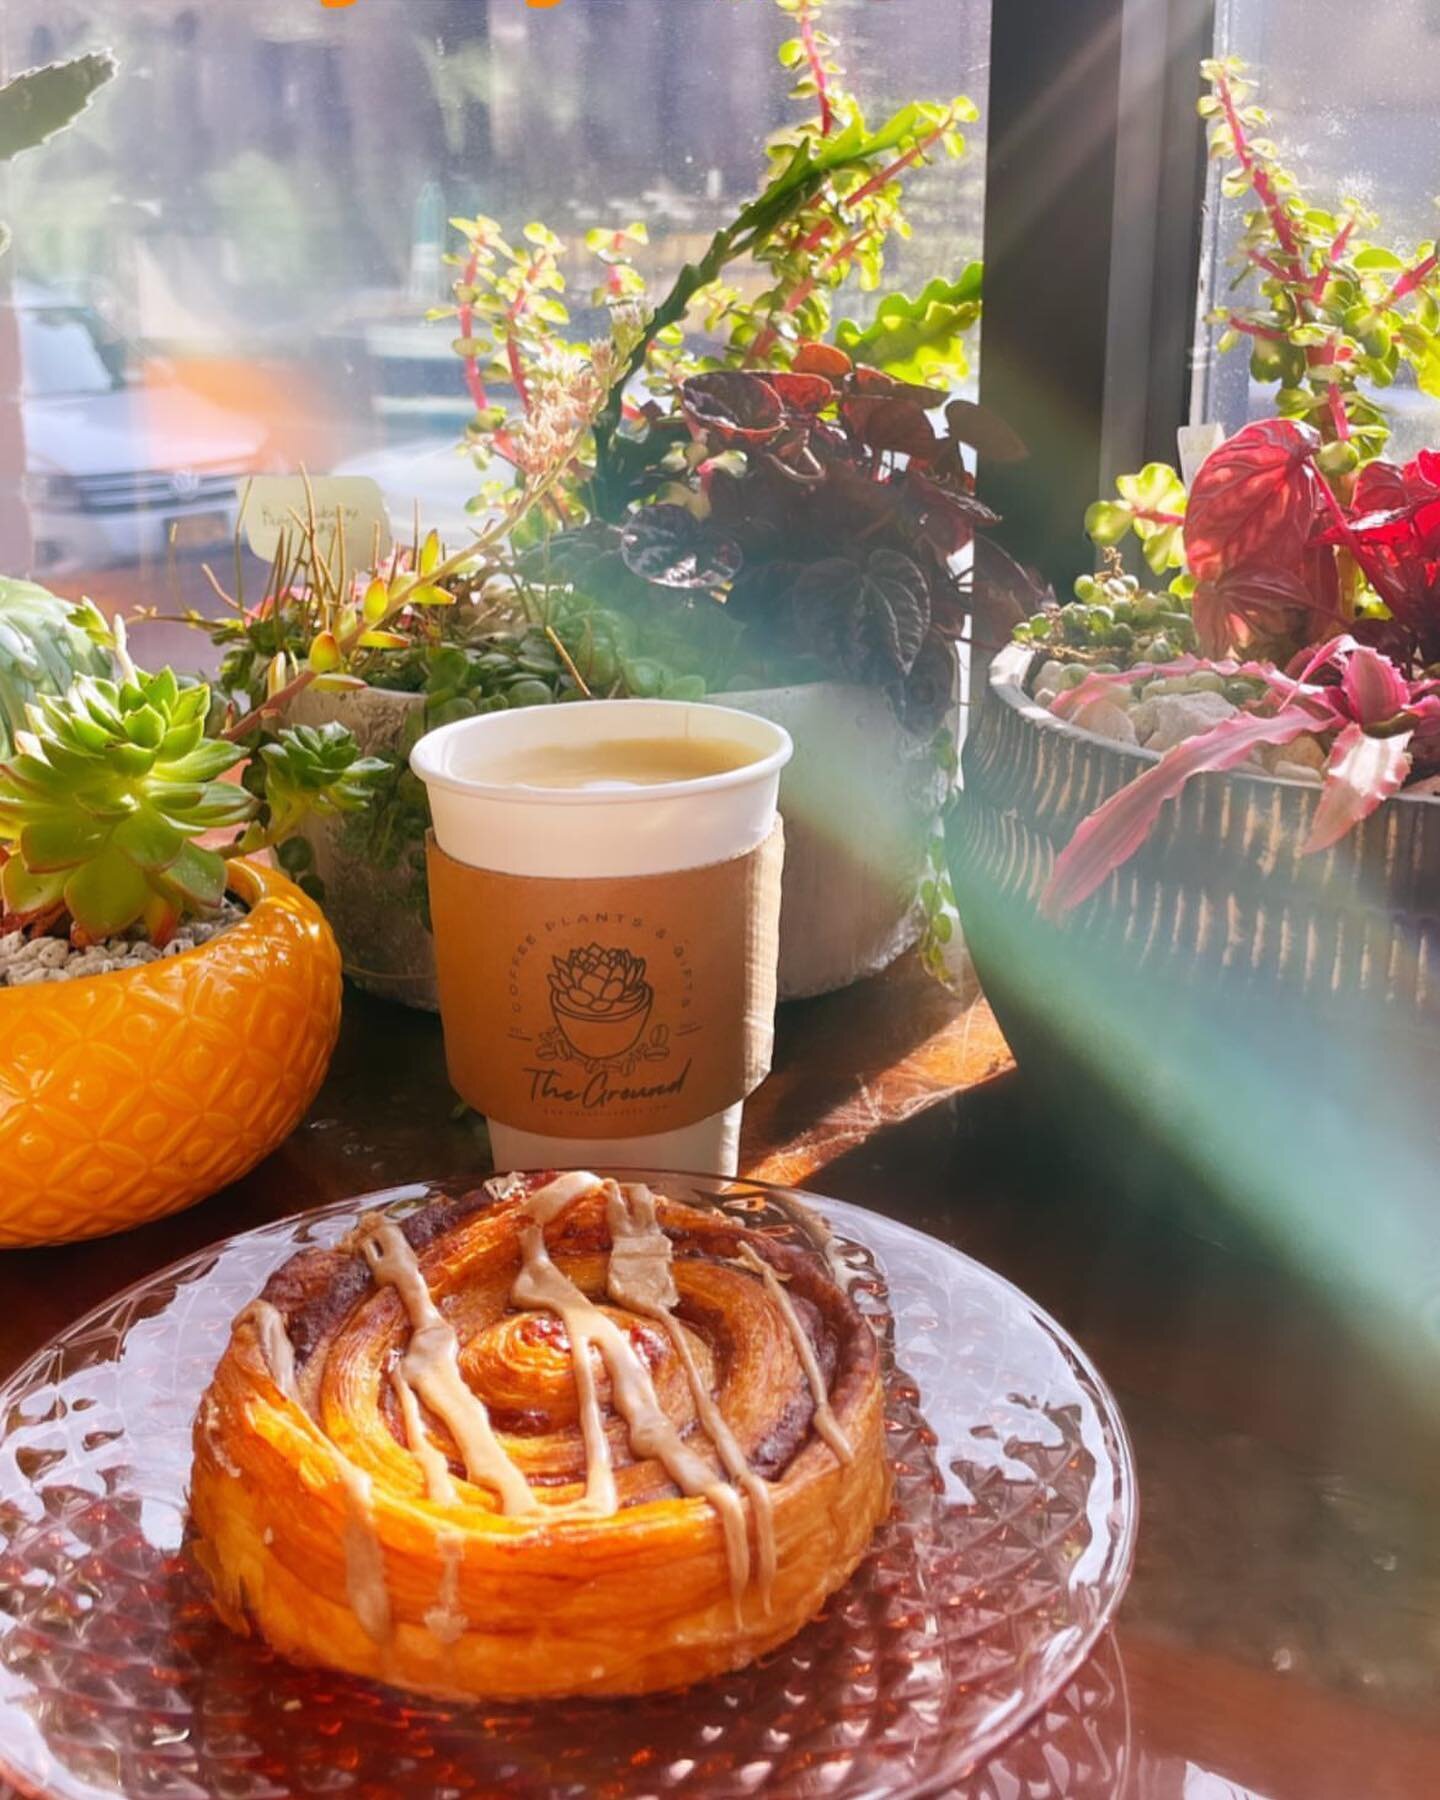 Dreamy mornings start from The Ground up. Surround yourself in our cozy little jungle. Our floor-to-ceiling windows envelop the space with glowing morning sun rays. The aroma of fresh coffee and pastries fill the air from the moment you step inside. 